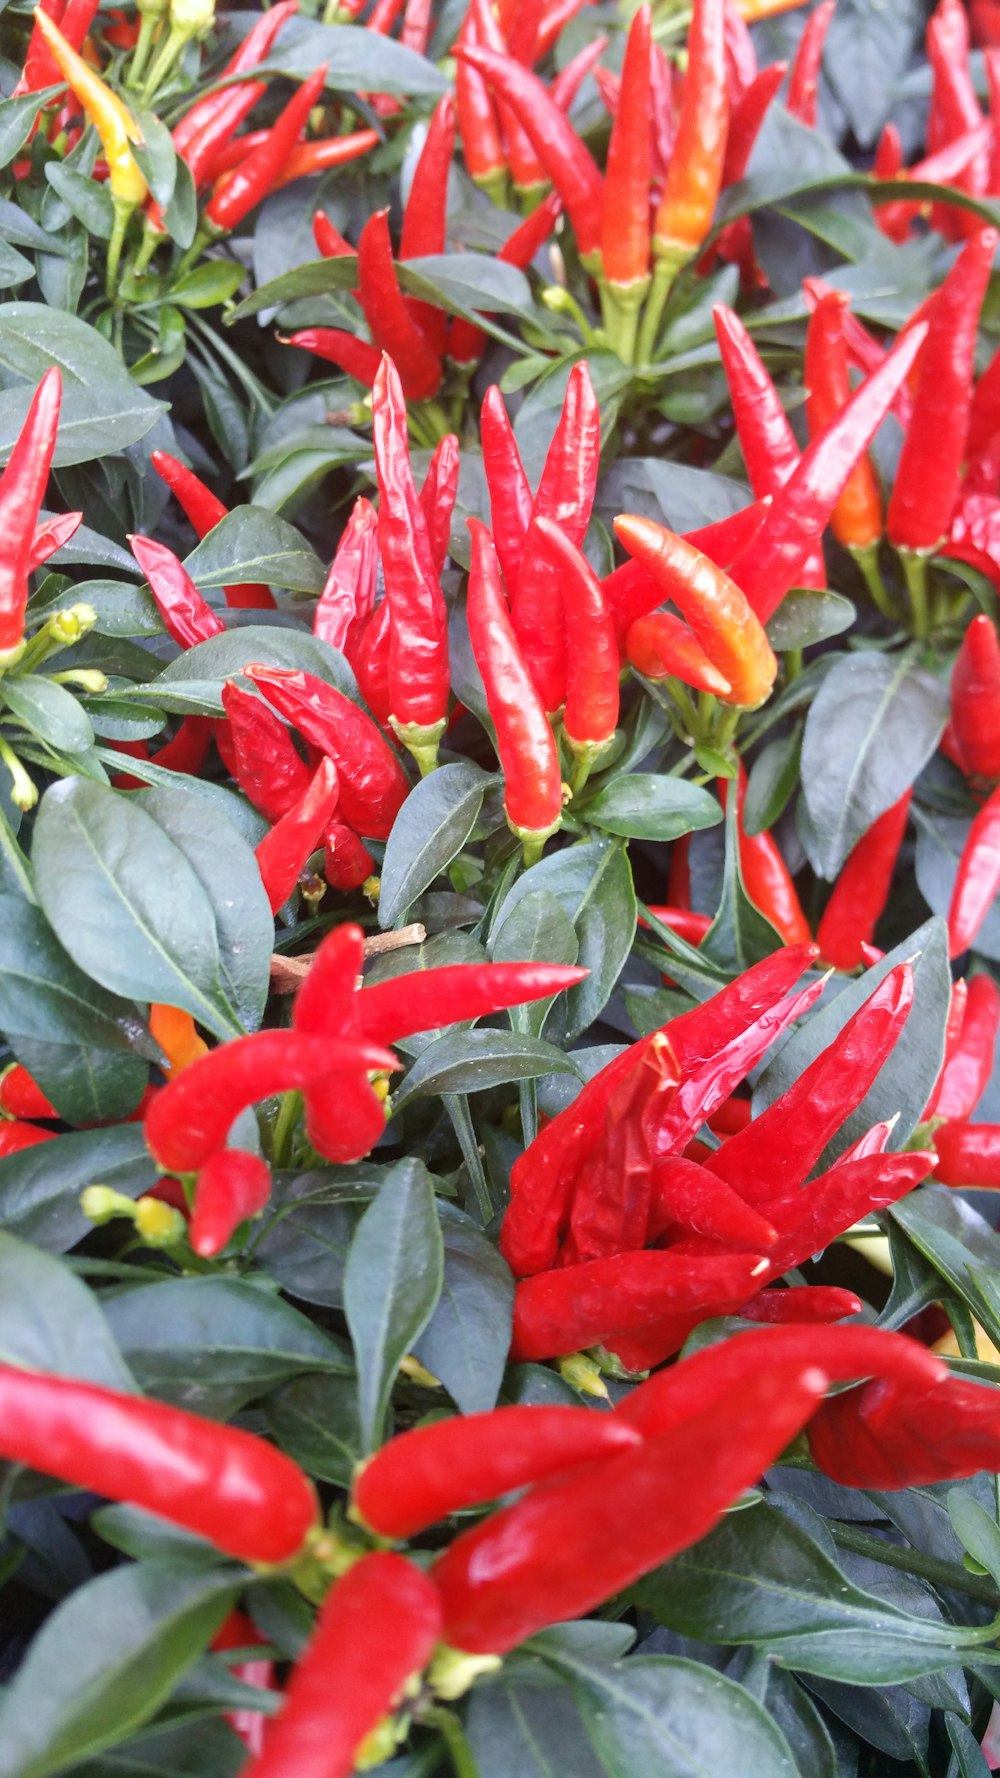 red chili plant in closeup photography